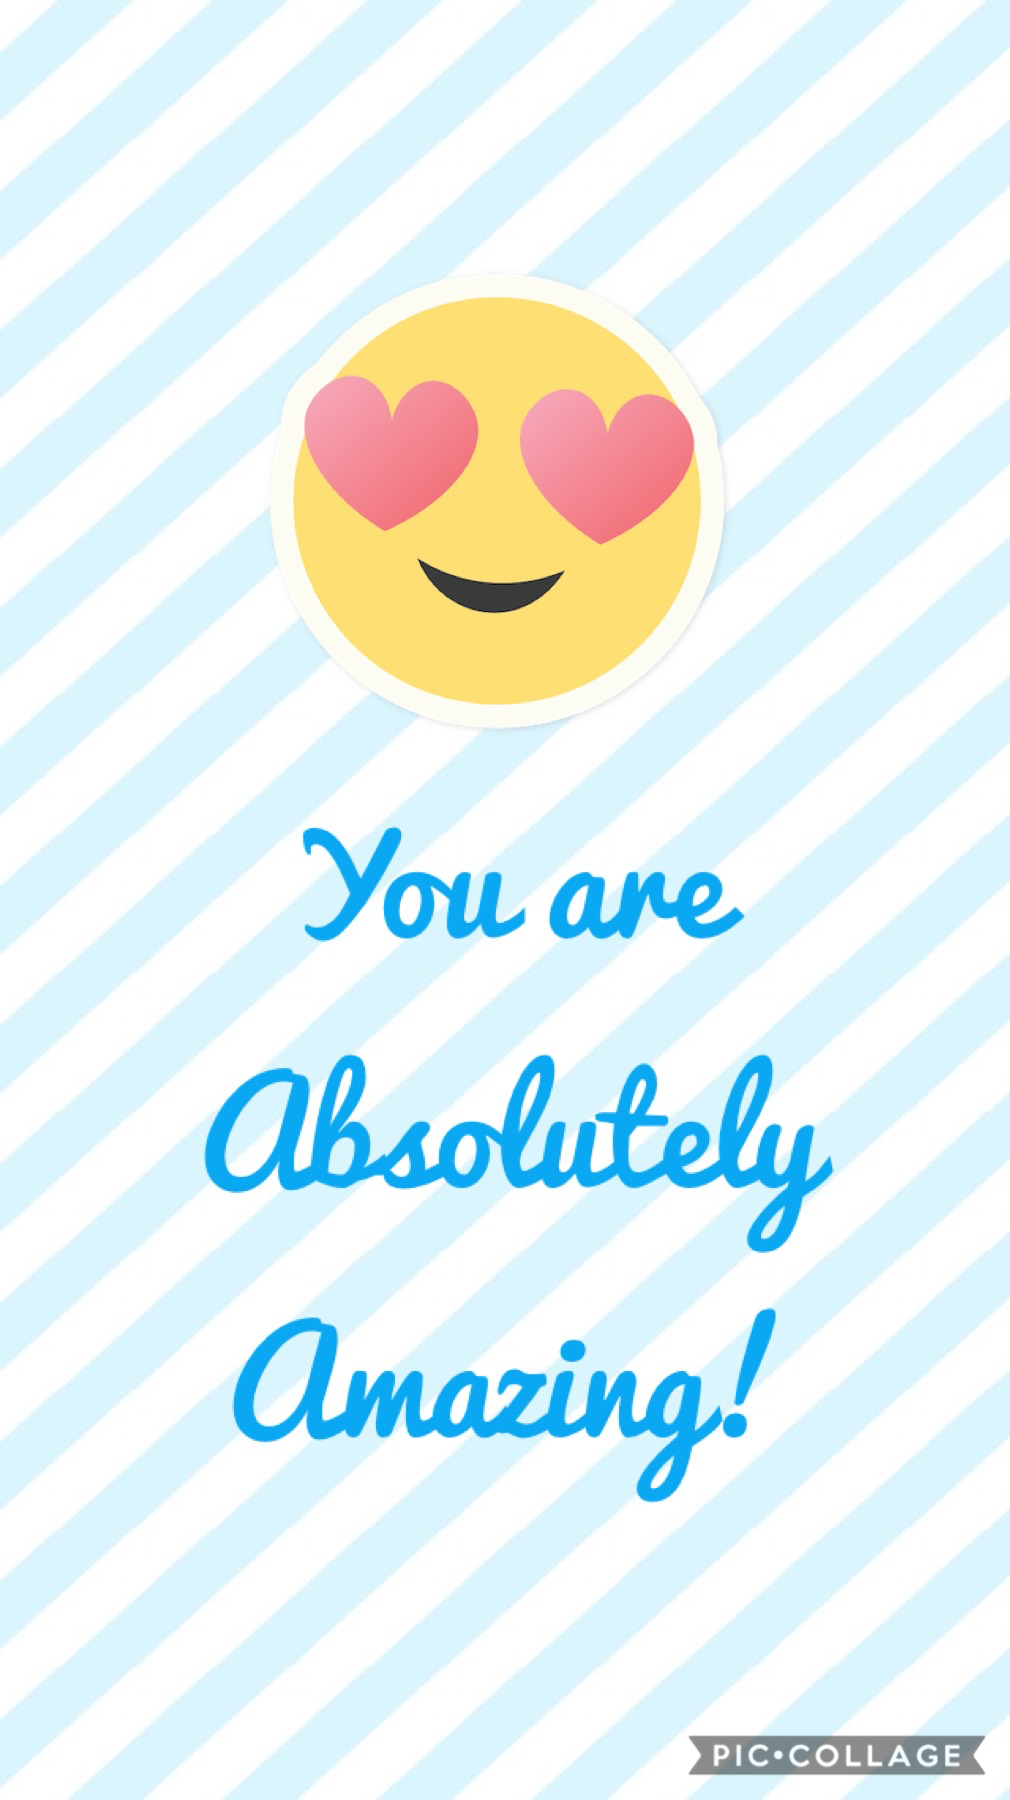 You are!